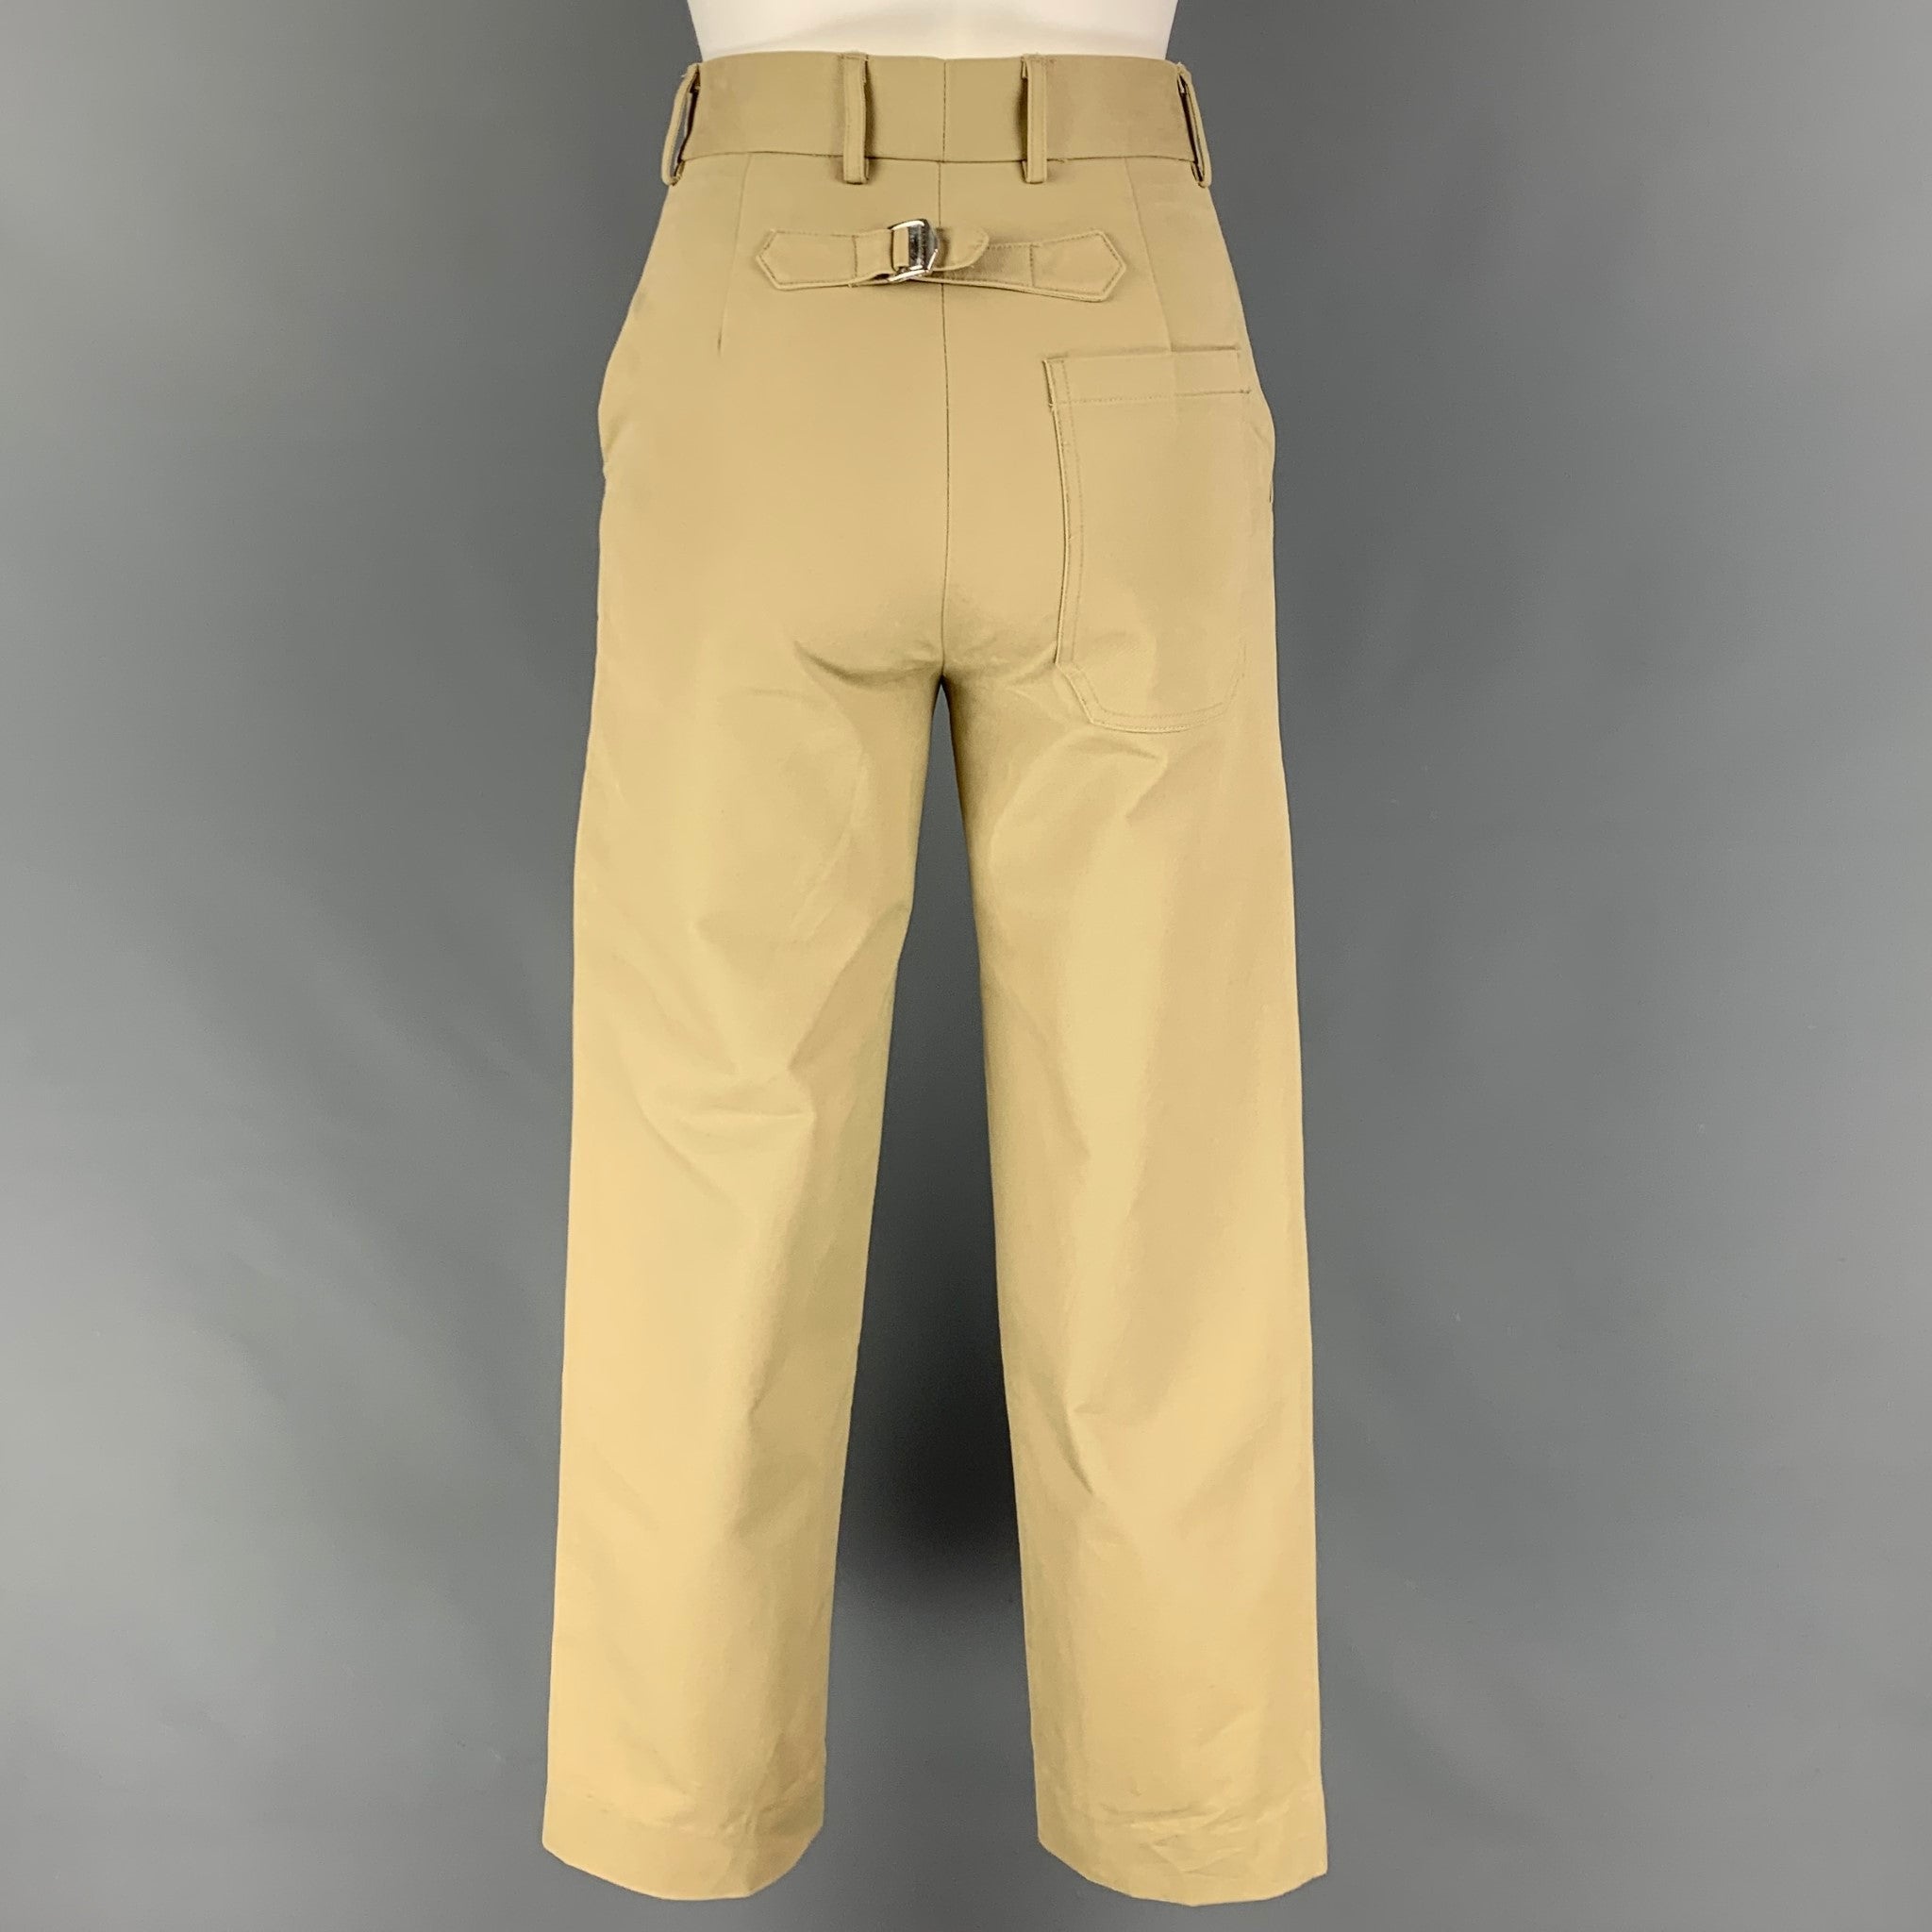 O'Connell's plain front Cotton Dress Gabardine Trousers - Khaki - Men's  Clothing, Traditional Natural shouldered clothing, preppy apparel